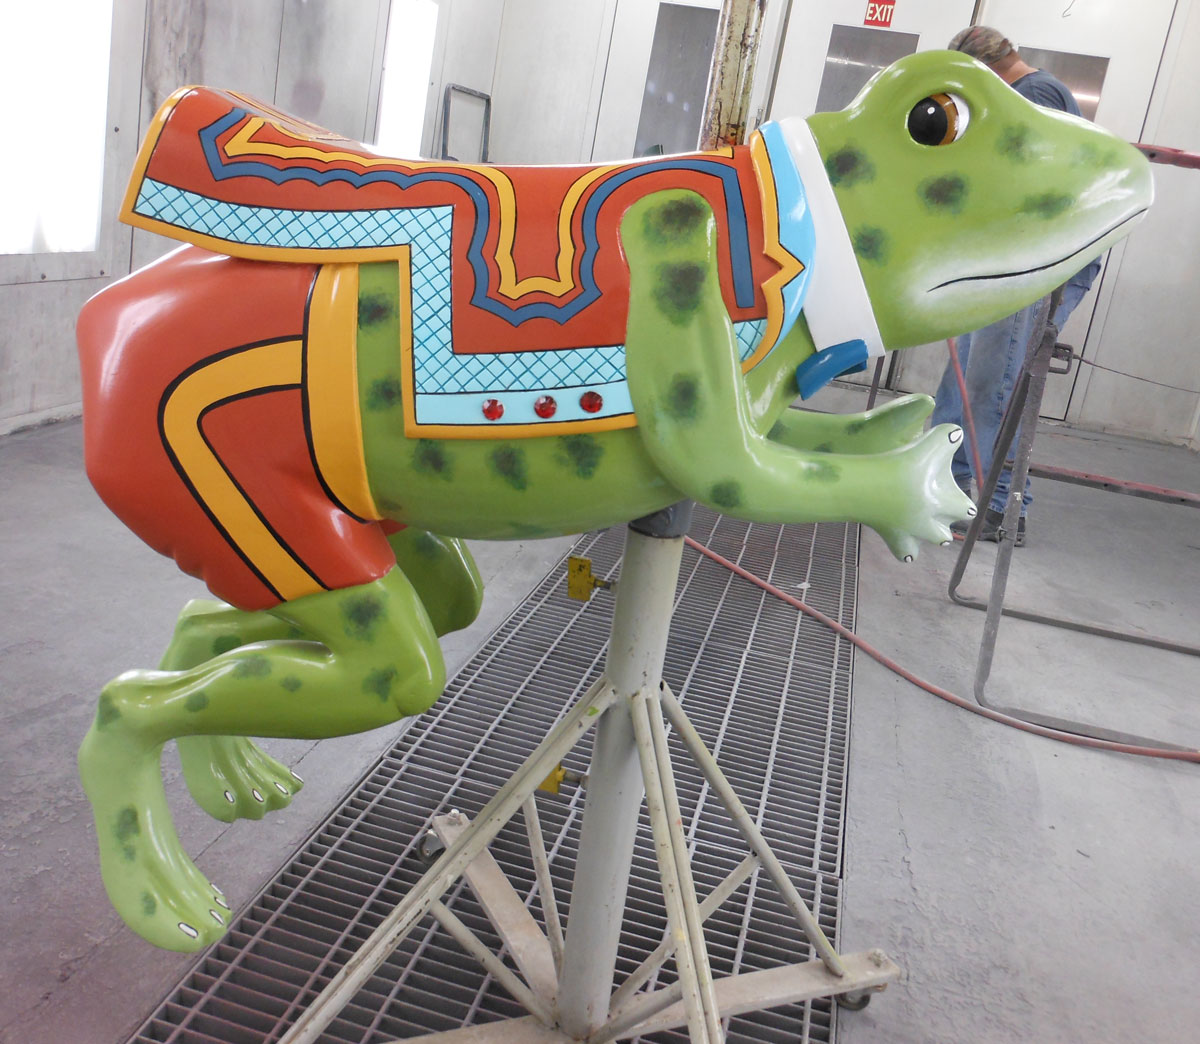 Restored carousel Hop Toad from The Henry Ford Museum, Greenfield Village, Dearborn, MI